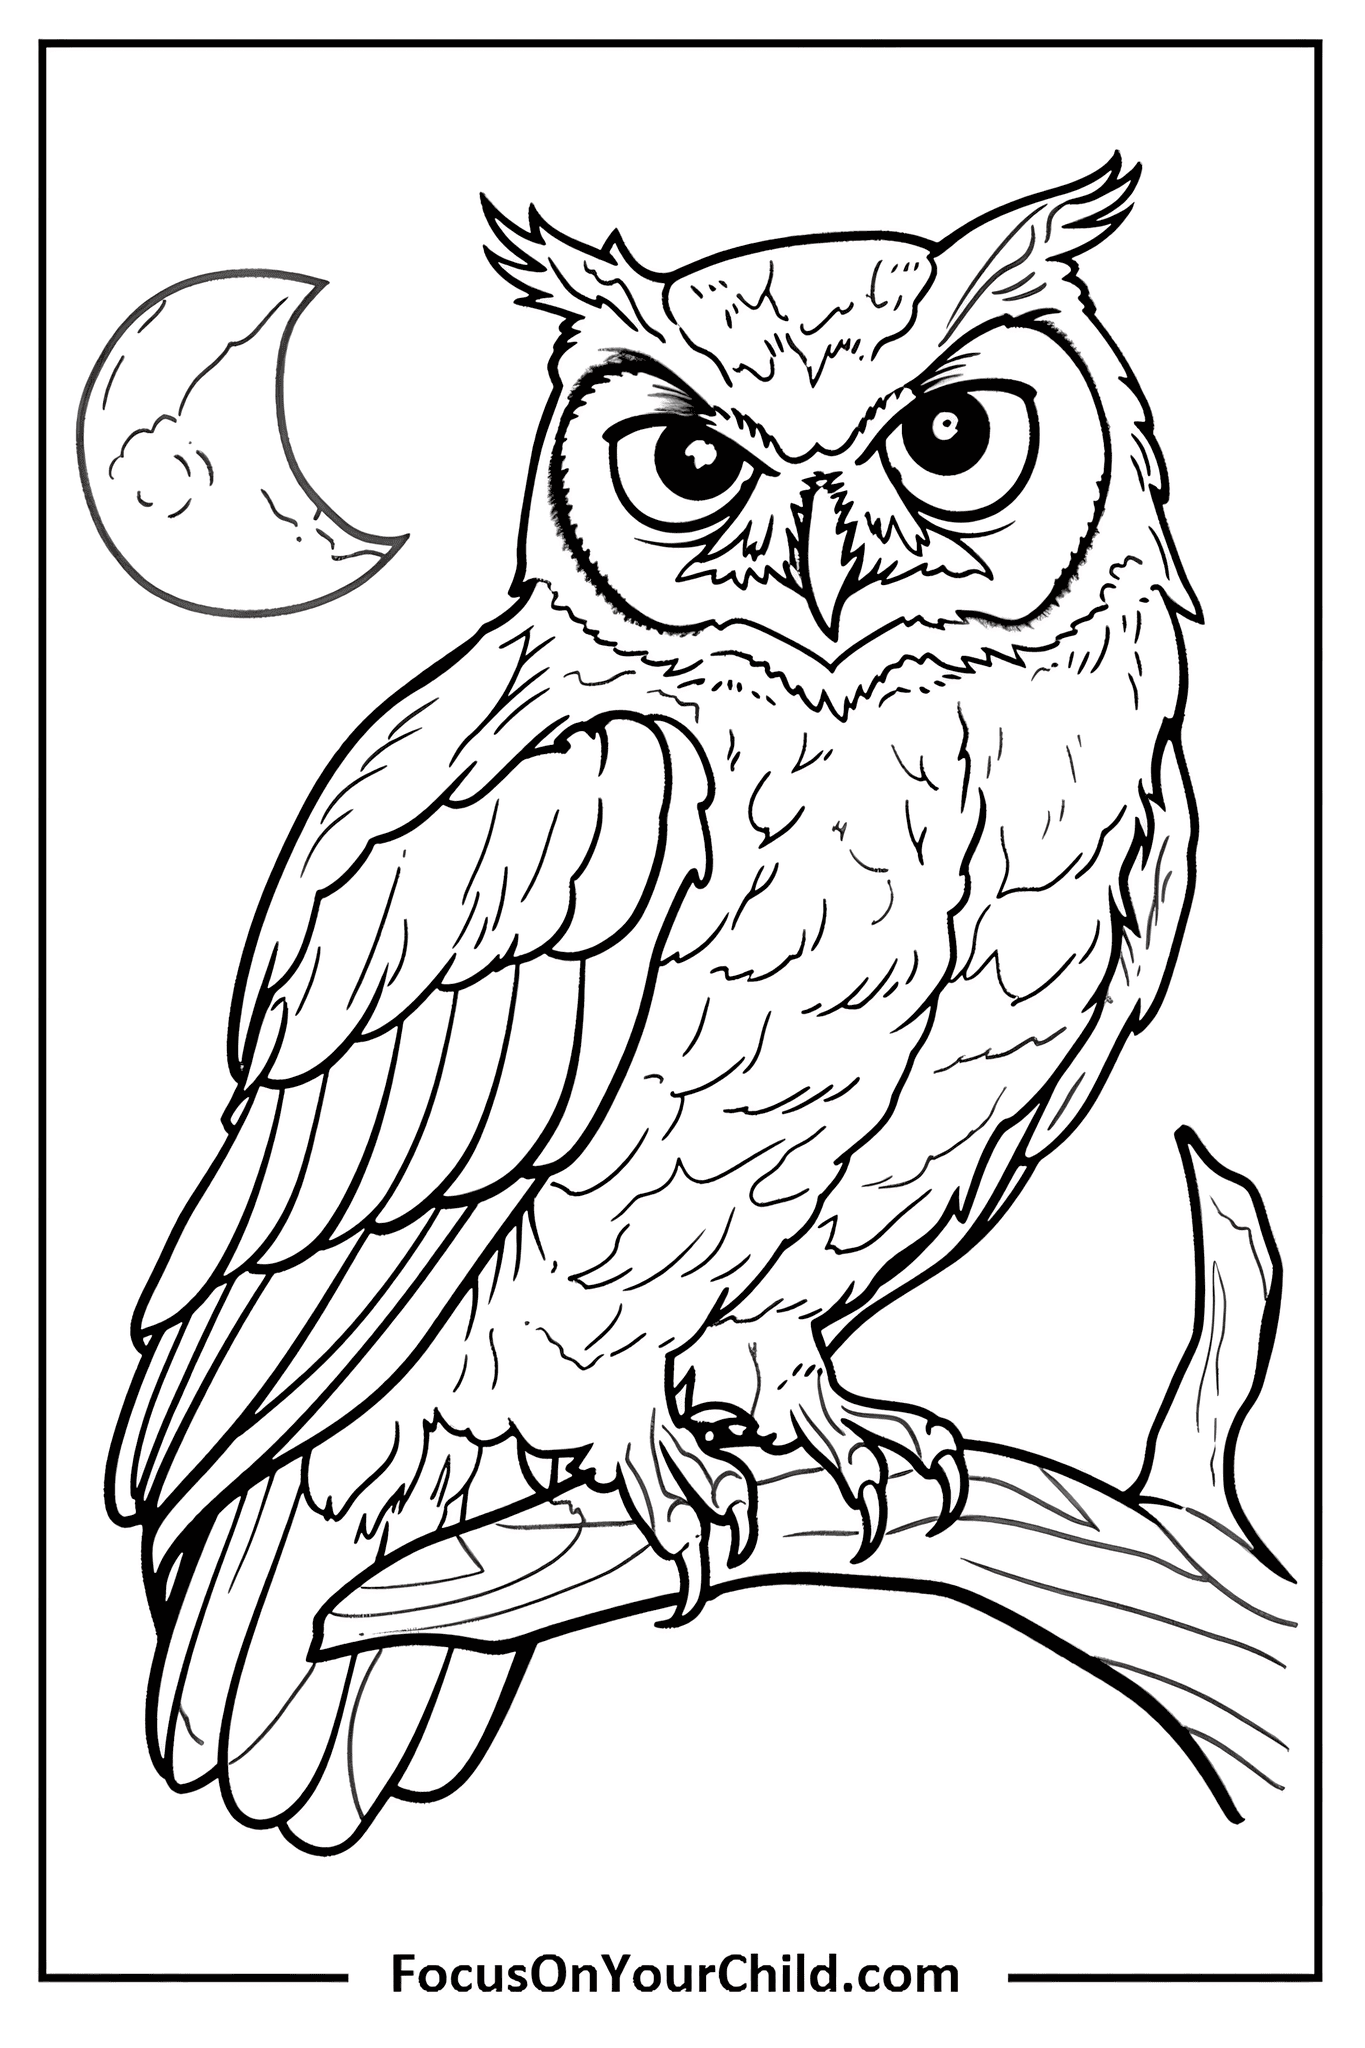 Detailed black and white owl drawing perched on a branch under a crescent moon.